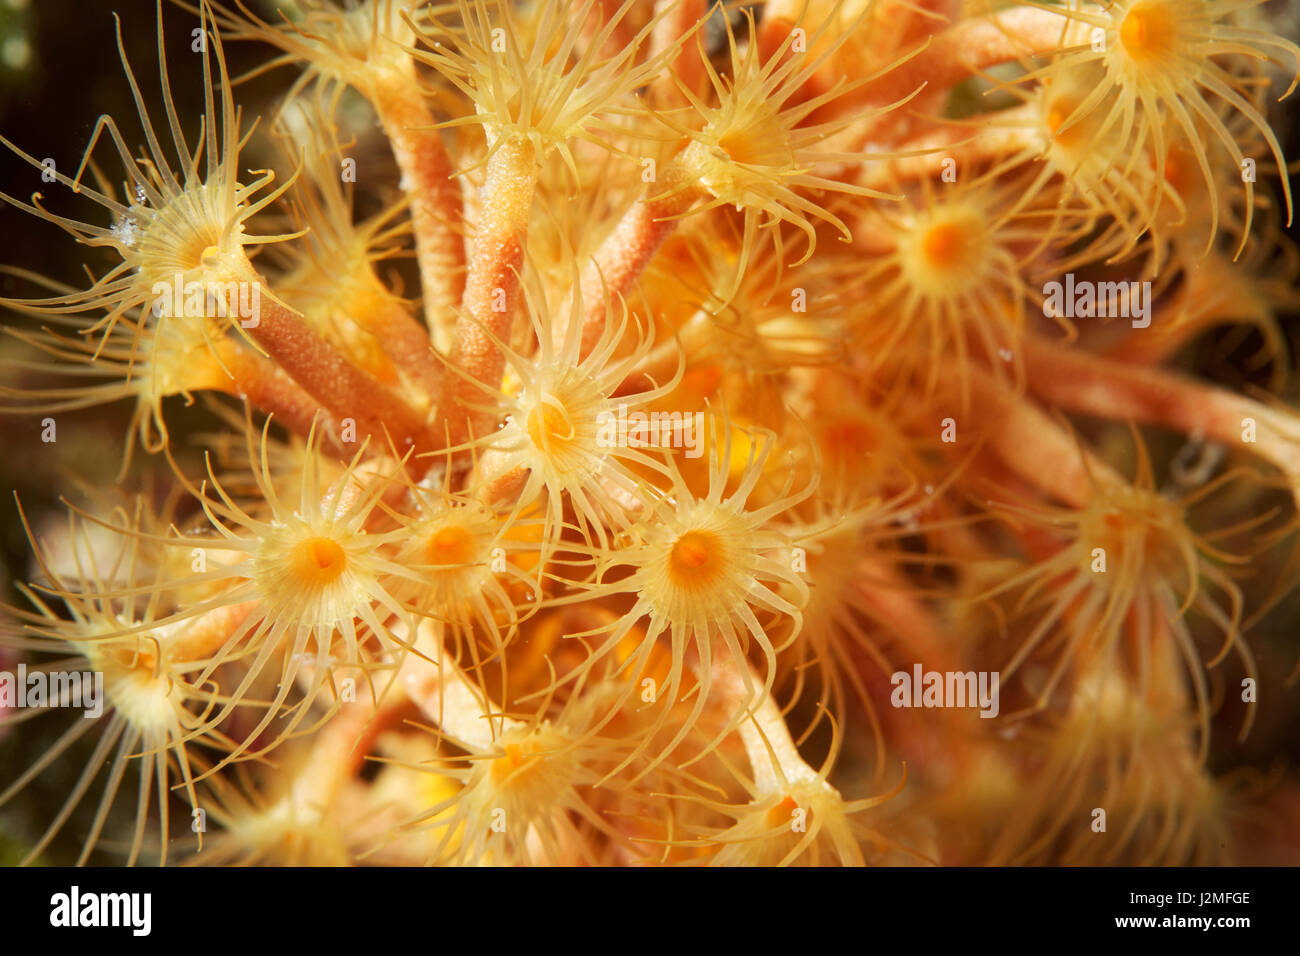 yellow cluster anemone from Pag, Adriatic seacoral Stock Photo